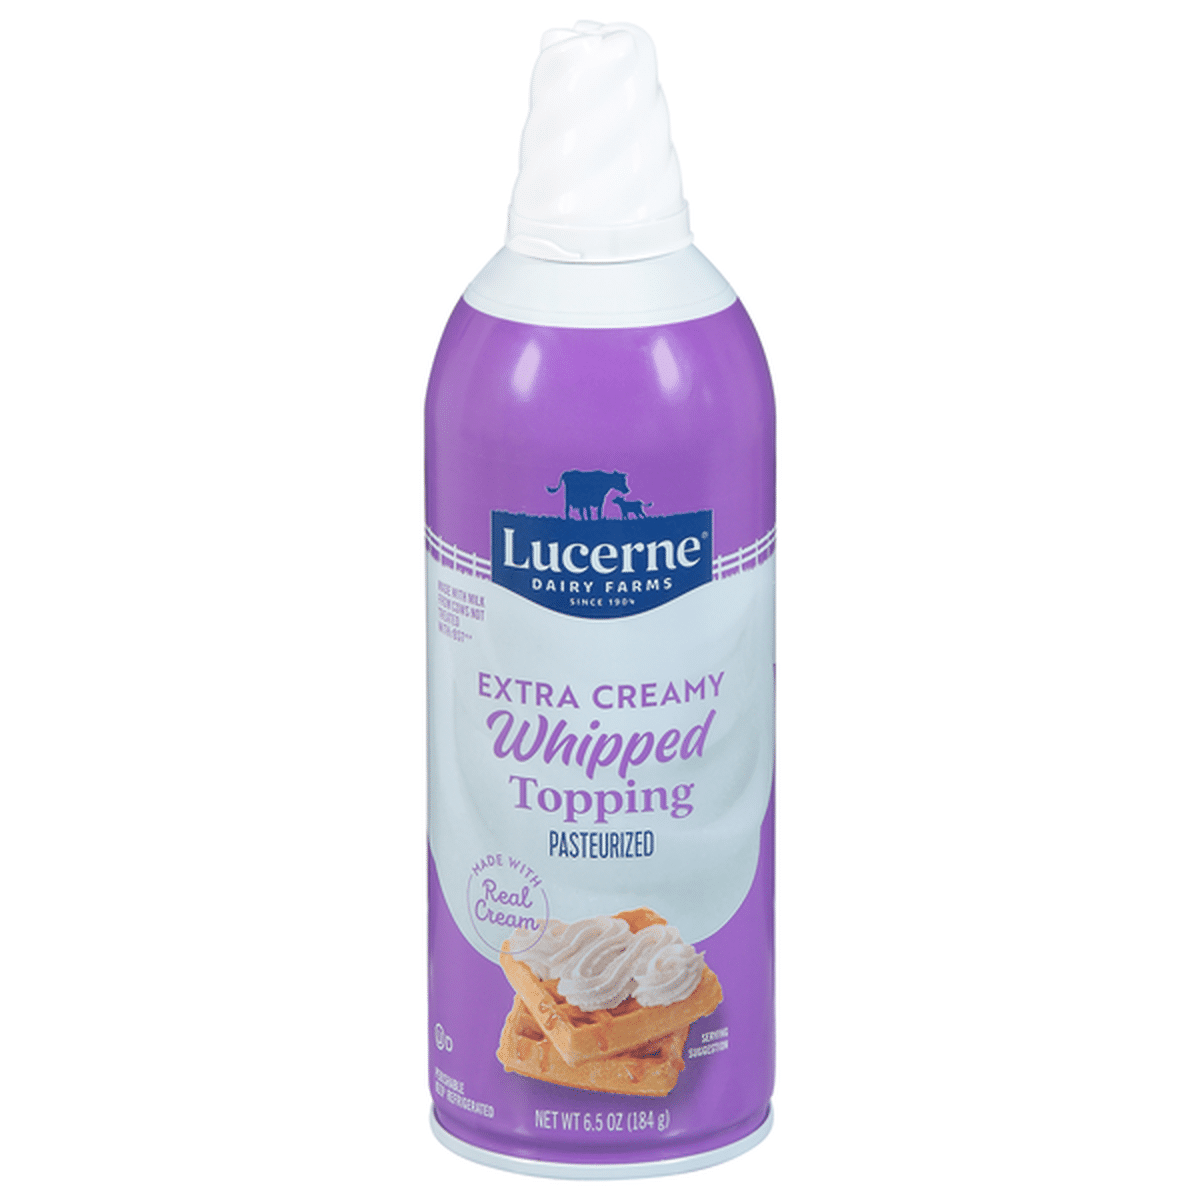 Lucerne Whipped Topping Extra Creamy Pasteurized 65 Oz Delivery Or Pickup Near Me Instacart